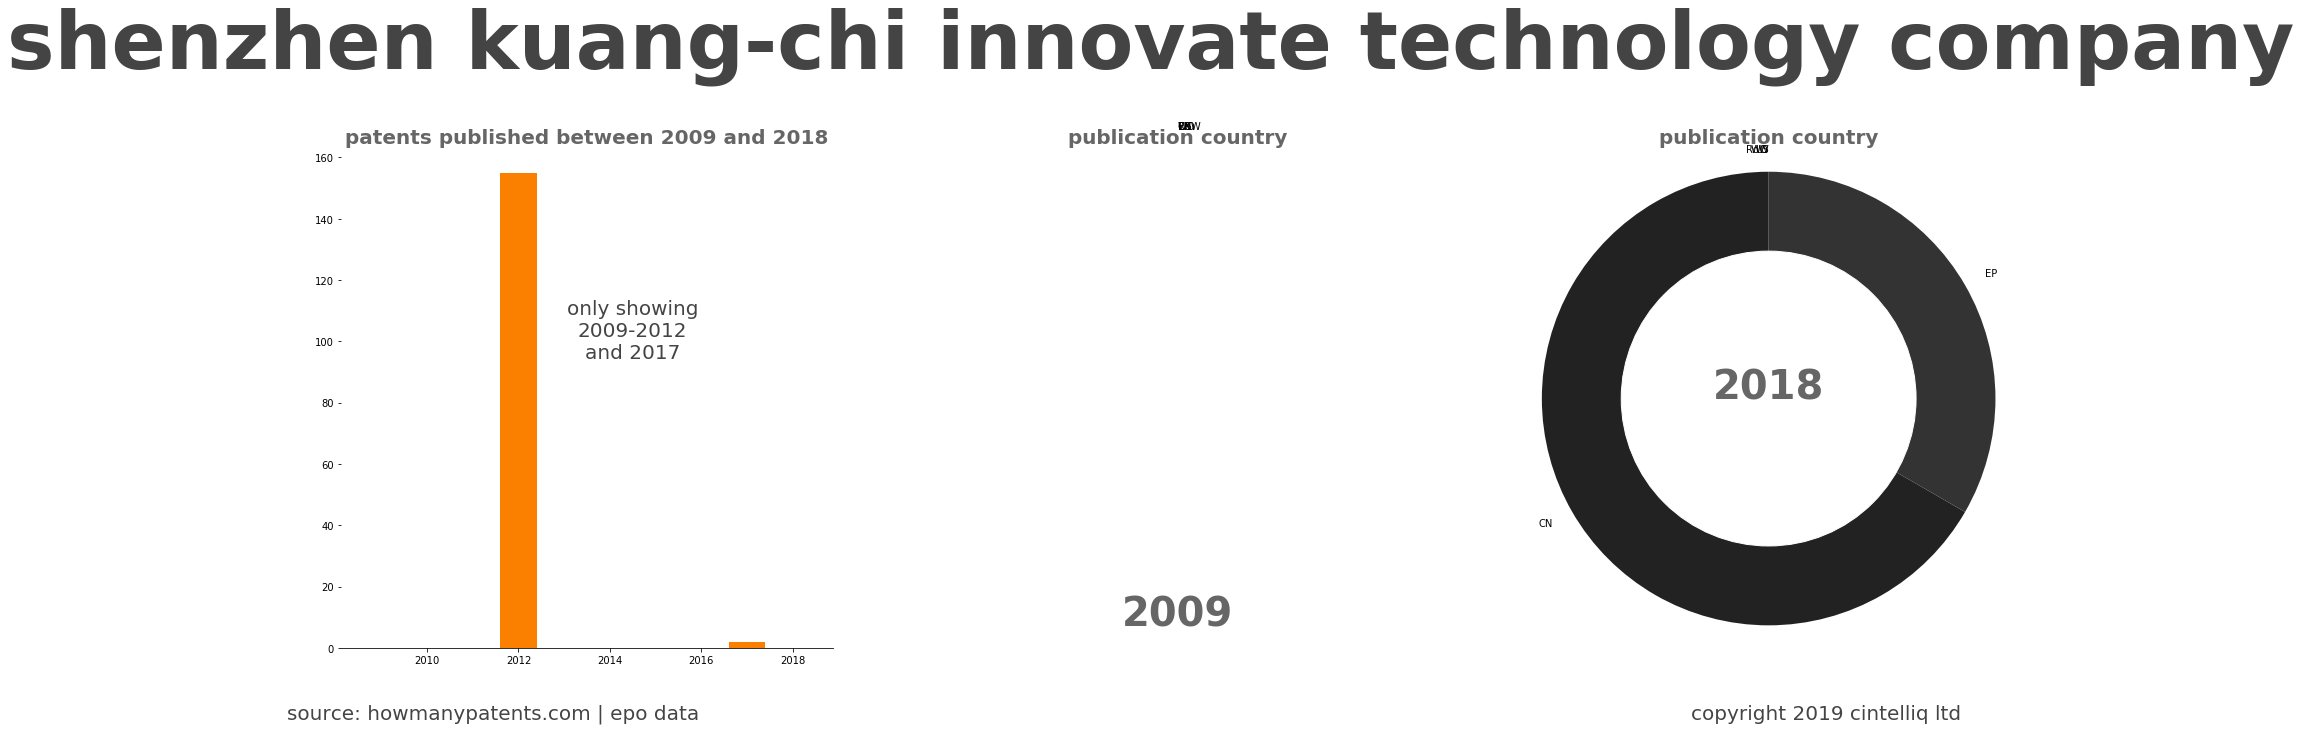 summary of patents for Shenzhen Kuang-Chi Innovate Technology Company